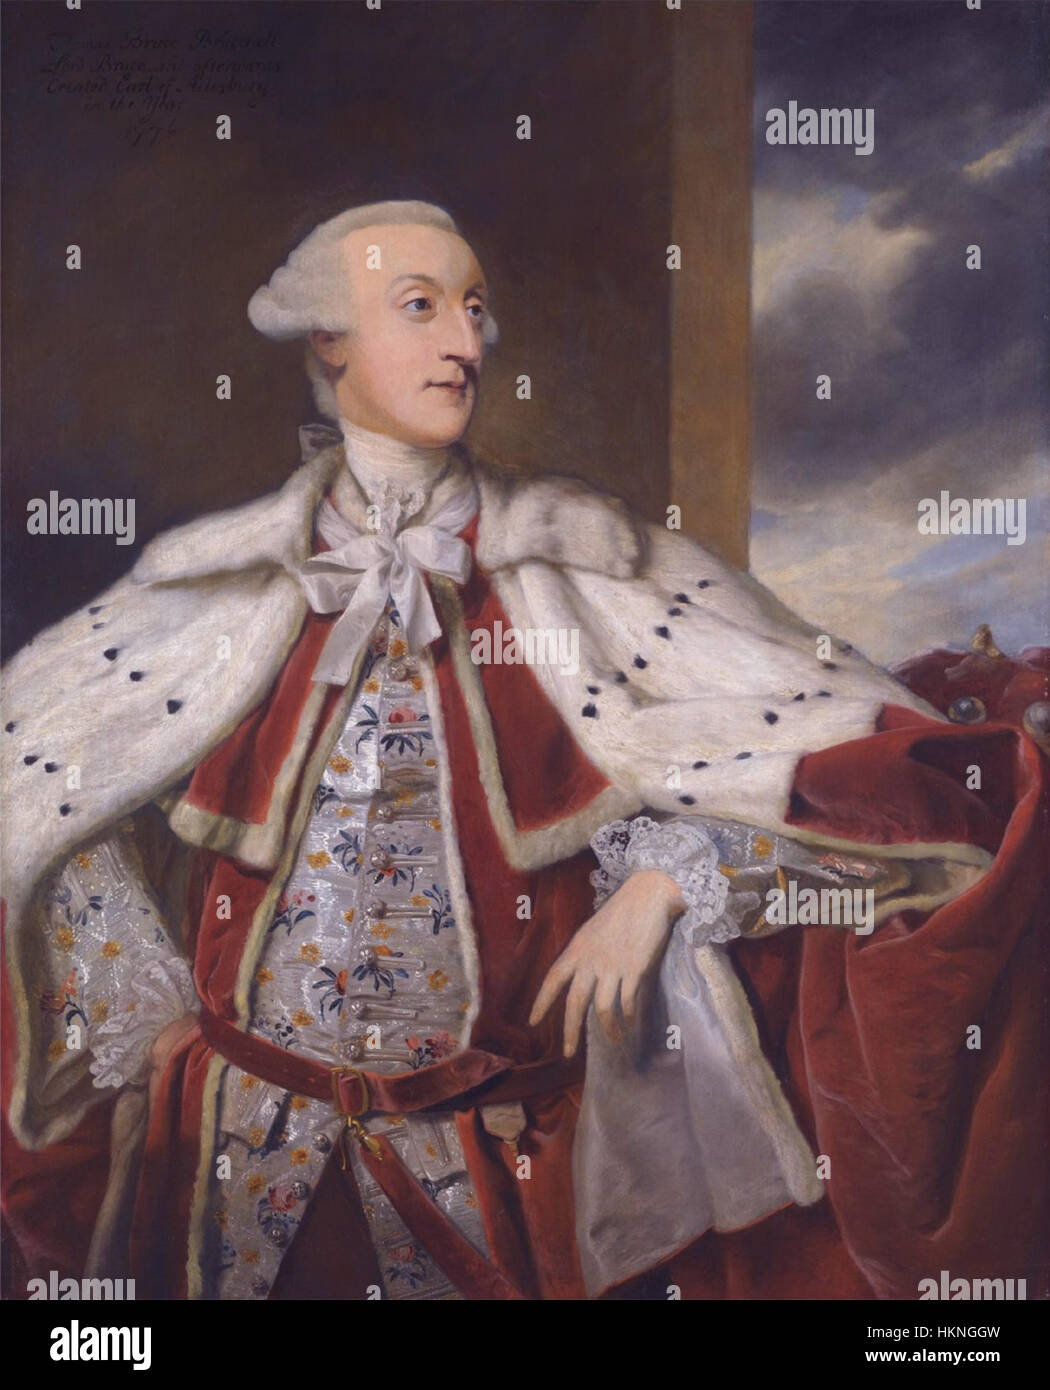 Joshua Reynolds, Portrait of Thomas Bruce Brudenell-Bruce, later 1st Earl of Ailesbury, in Peer's Robes (1776) Stock Photo